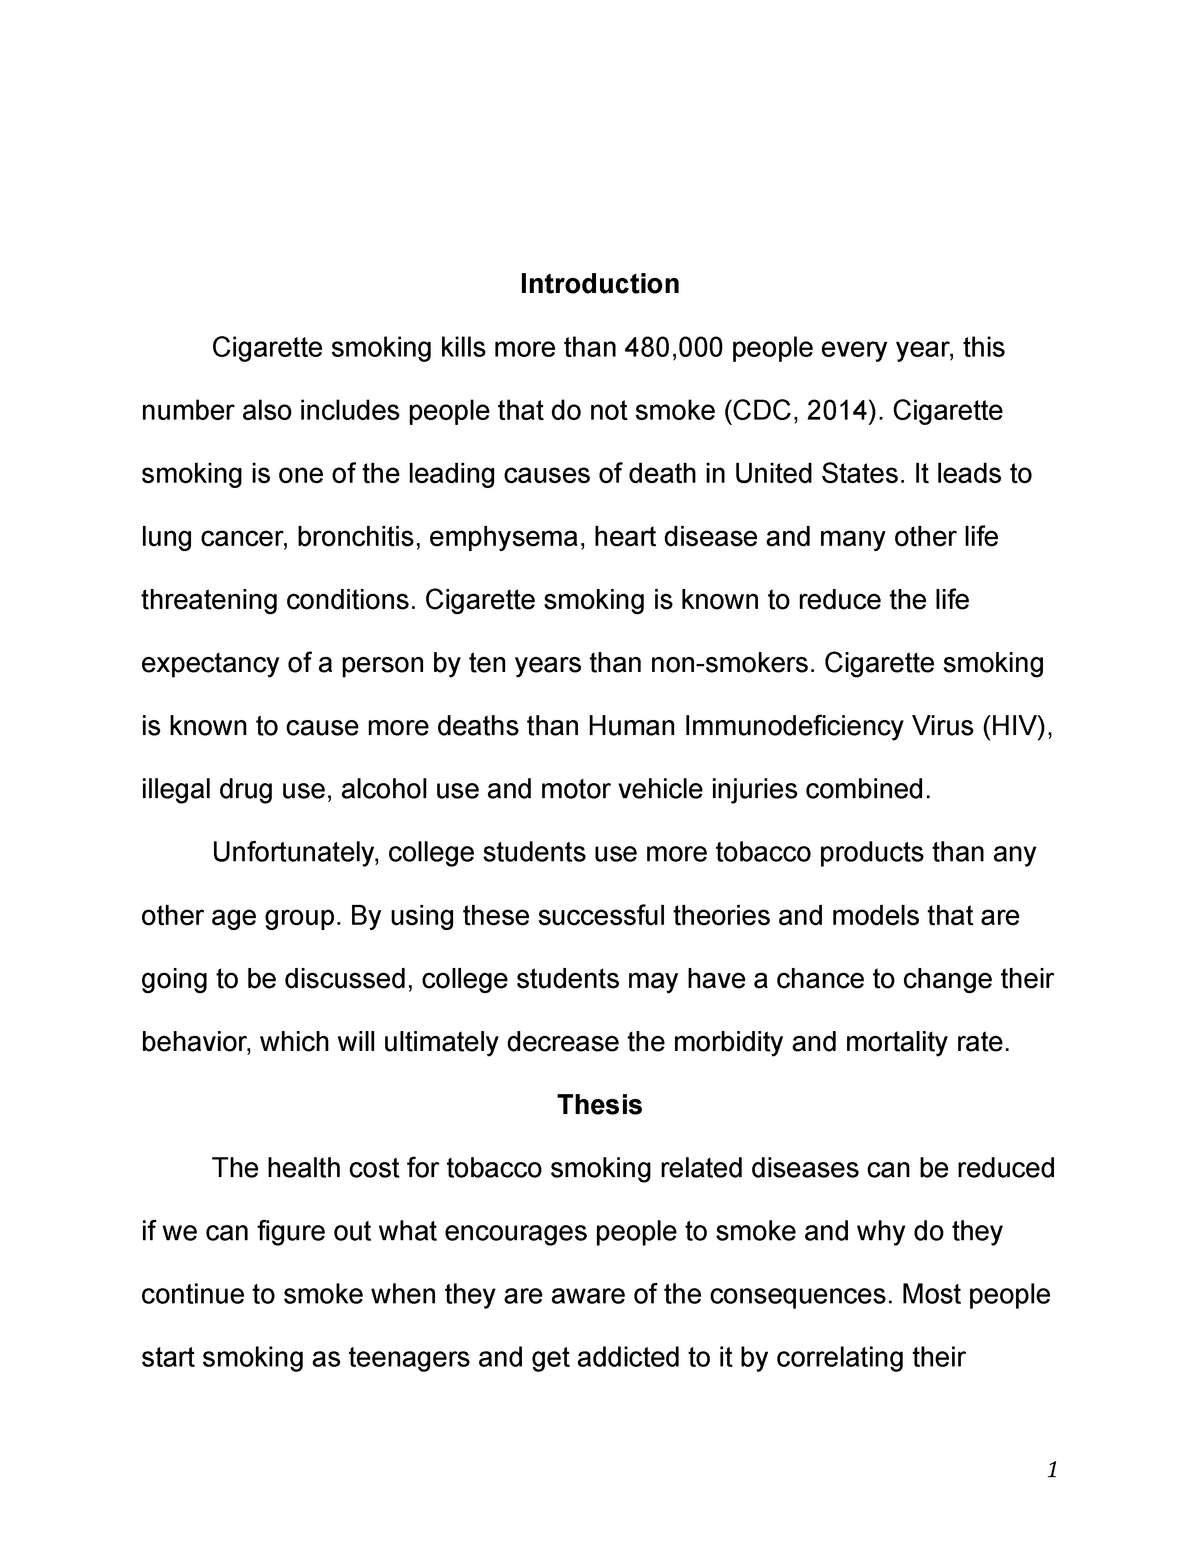 cigarette smoking research paper conclusion